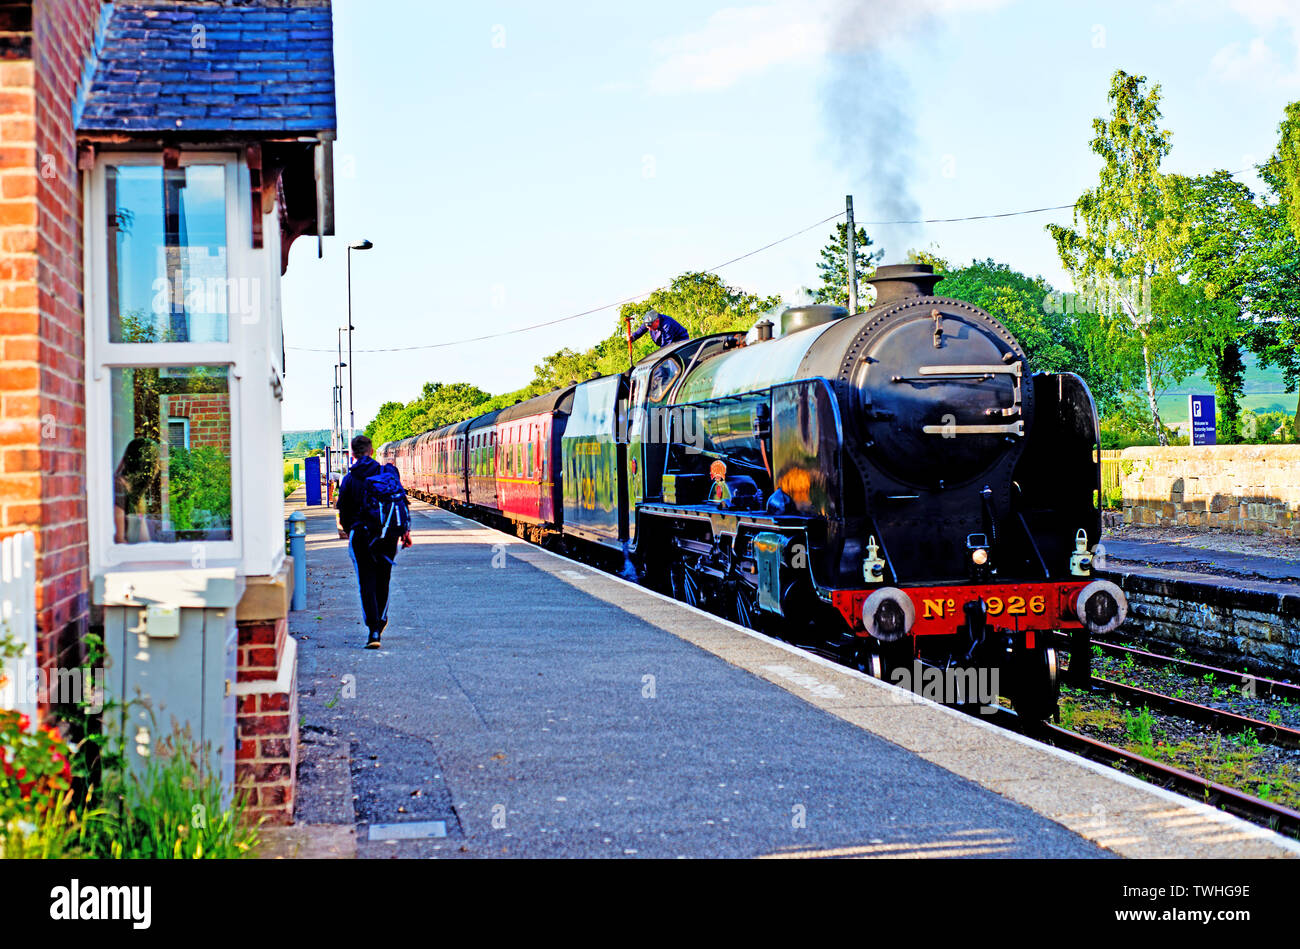 Schools Class no 926 Repton at Battersby junction Railway Station, North Yorkshire, England Stock Photo